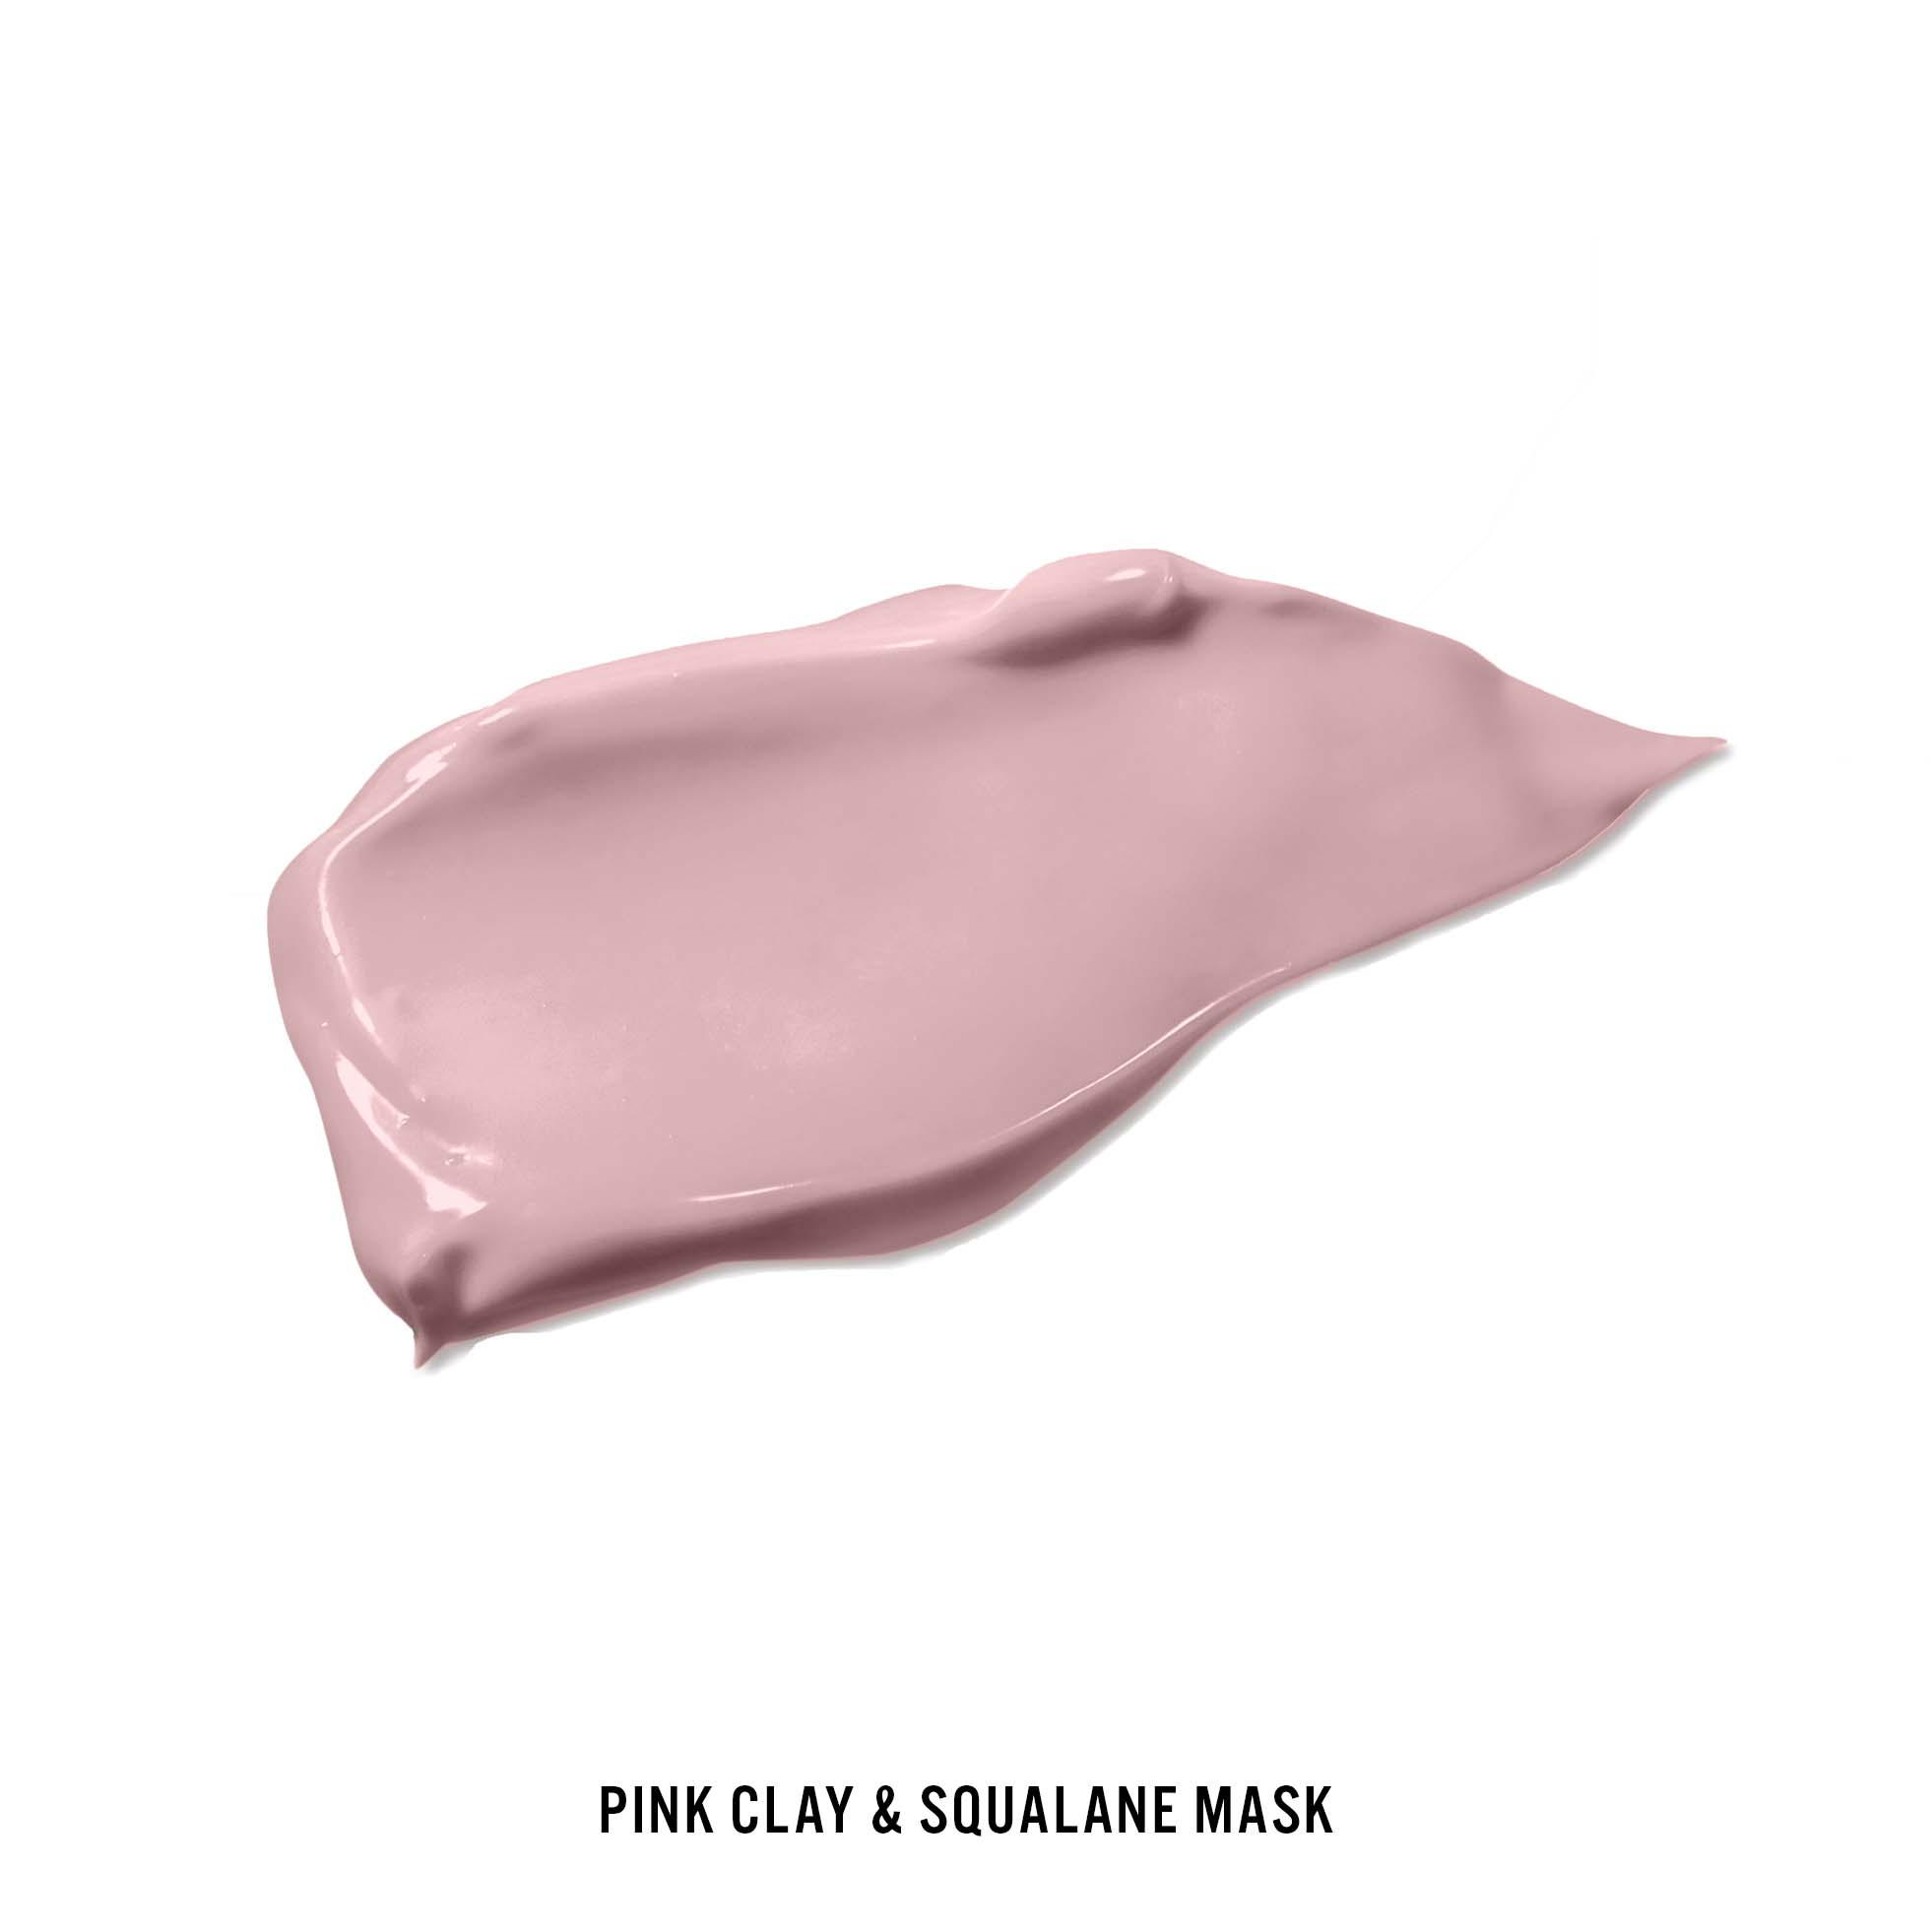 PINK CLAY & SQUALANE MASK